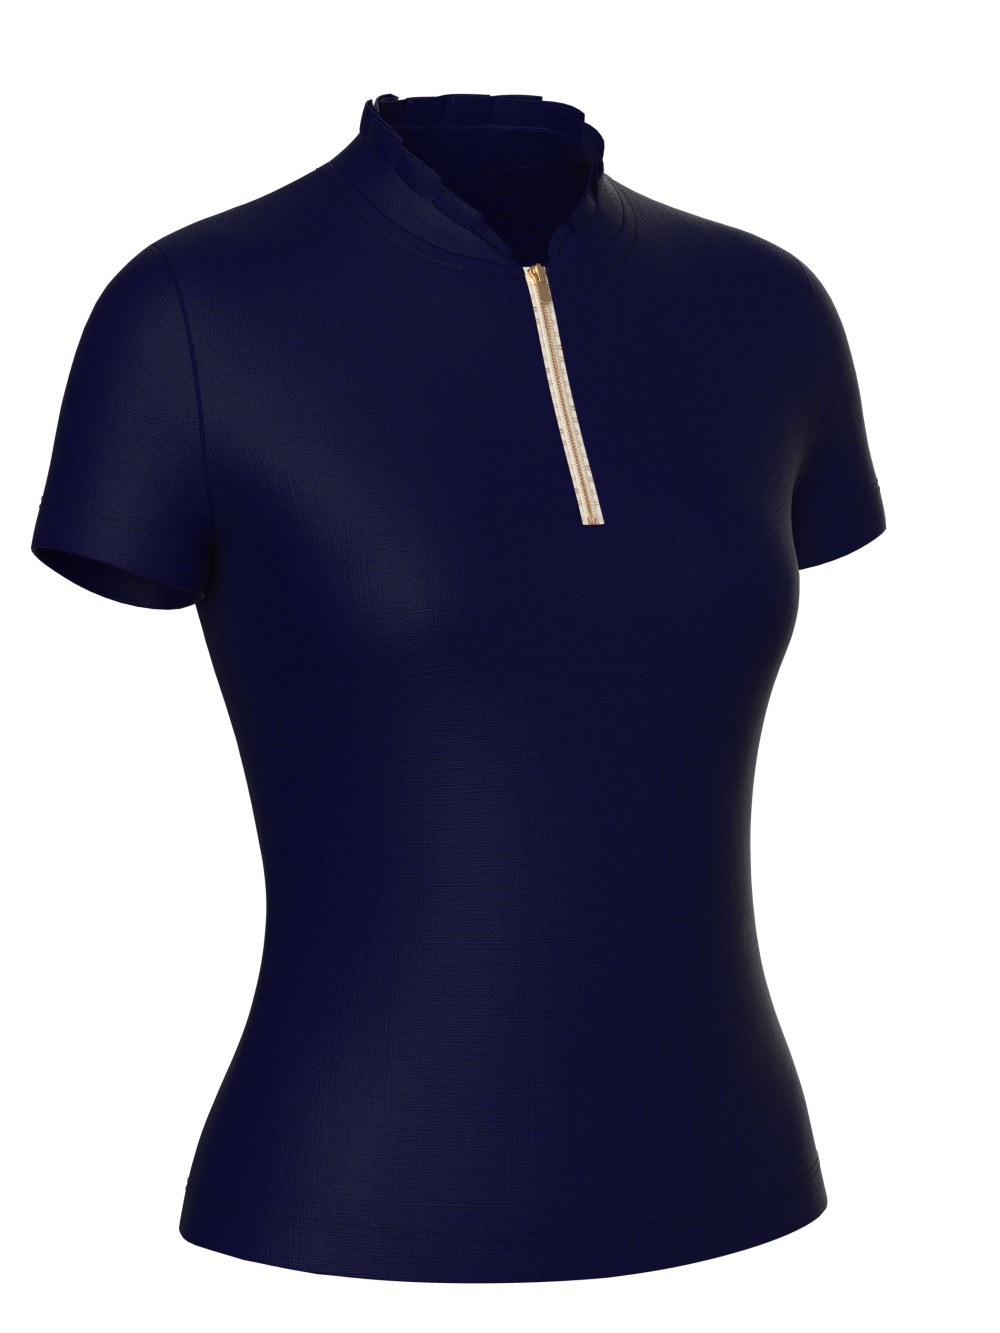 Chambery_Signature Golf Shirt with short sleeves